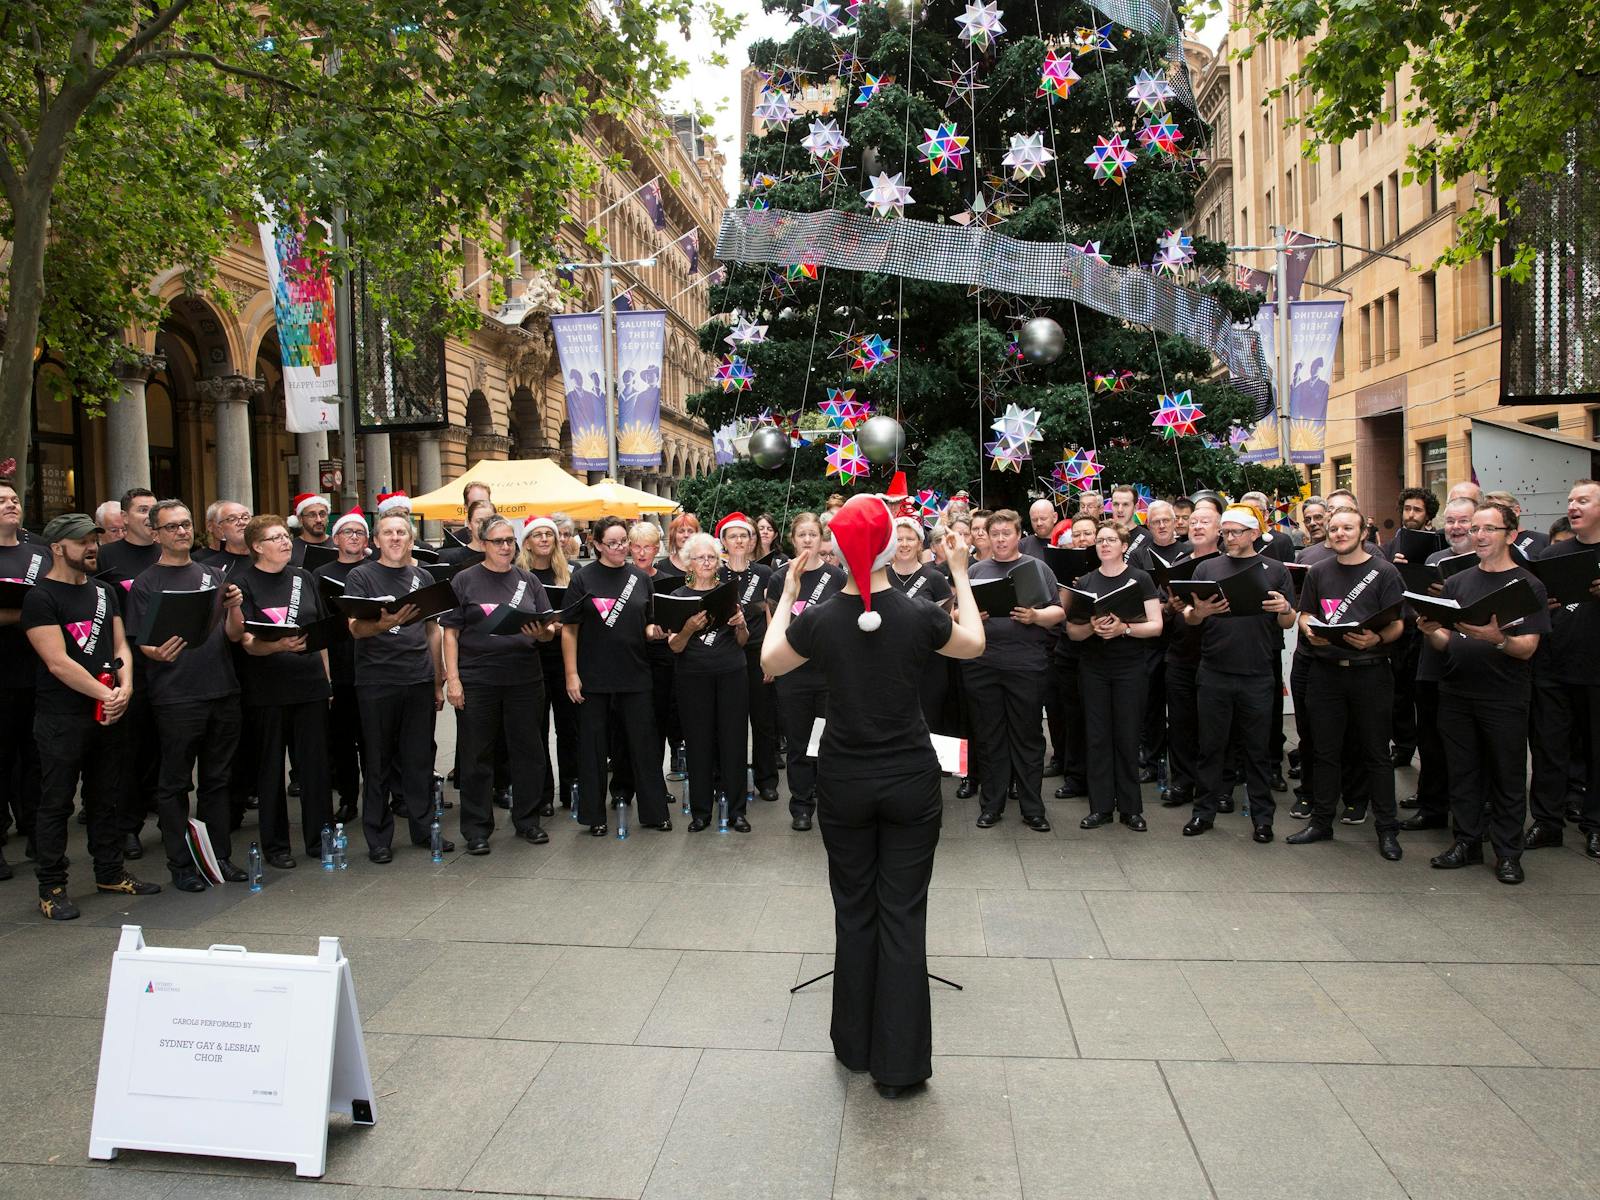 Image for Choirs in the City - Martin Place Christmas Tree and Pitt Street Mall